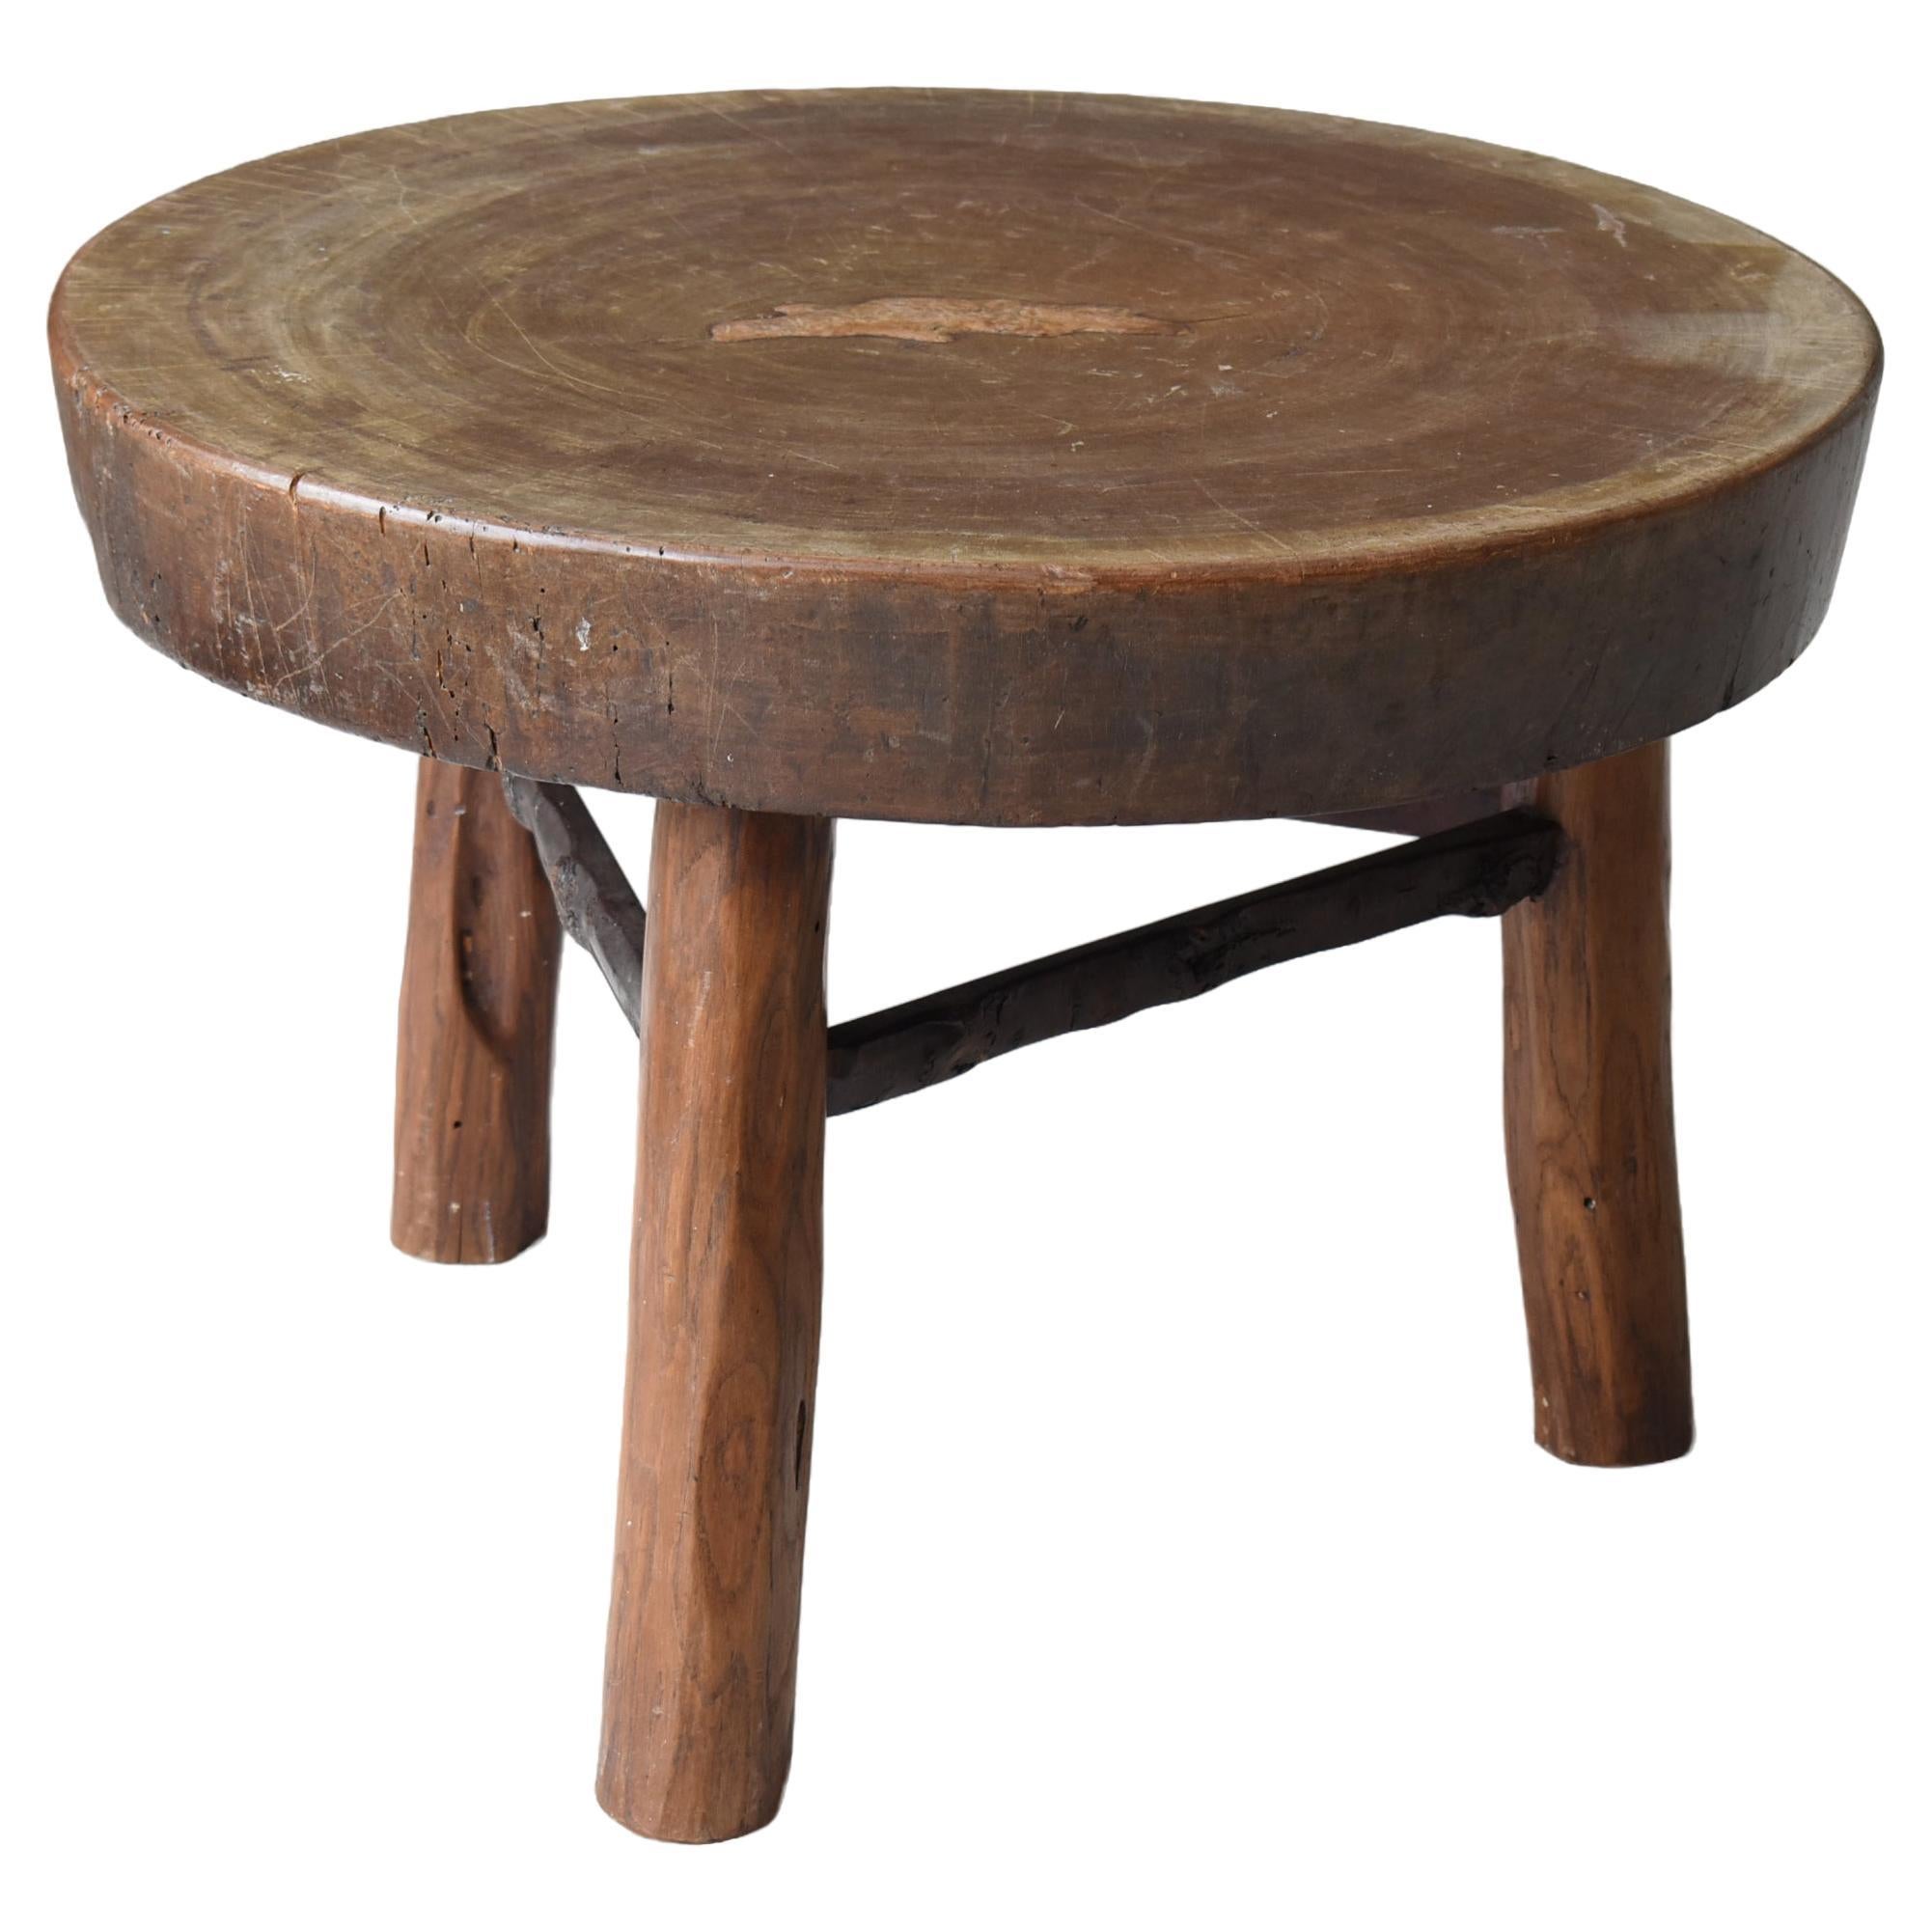 Japanese Old Primitive Coffee Table 1940s-1960s / Round Table Mingei Wabisabi For Sale